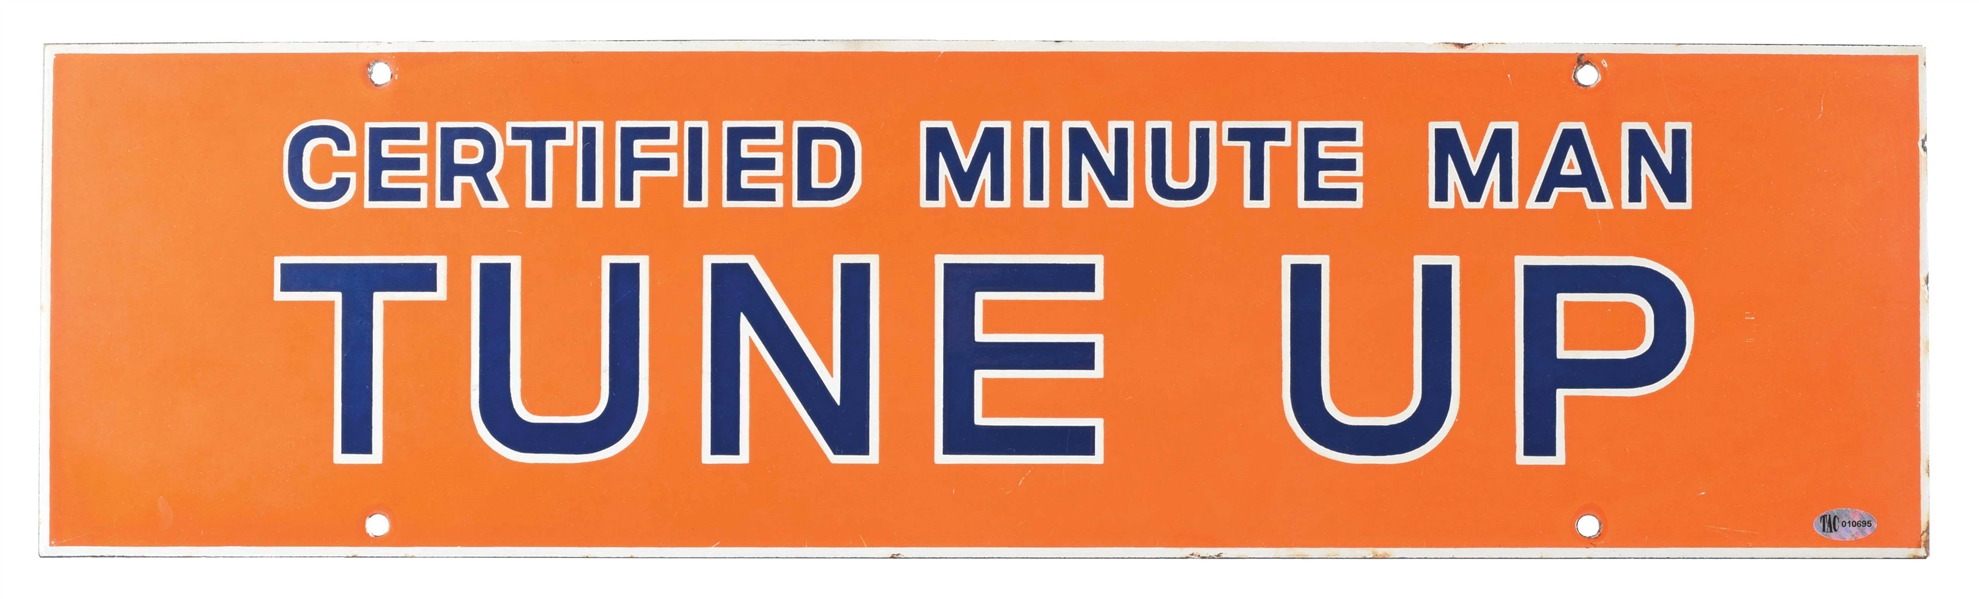 UNION 76 CERTIFIED MINUTE MAN TUNE UP PORCELAIN SERVICE STATION SIGN. 